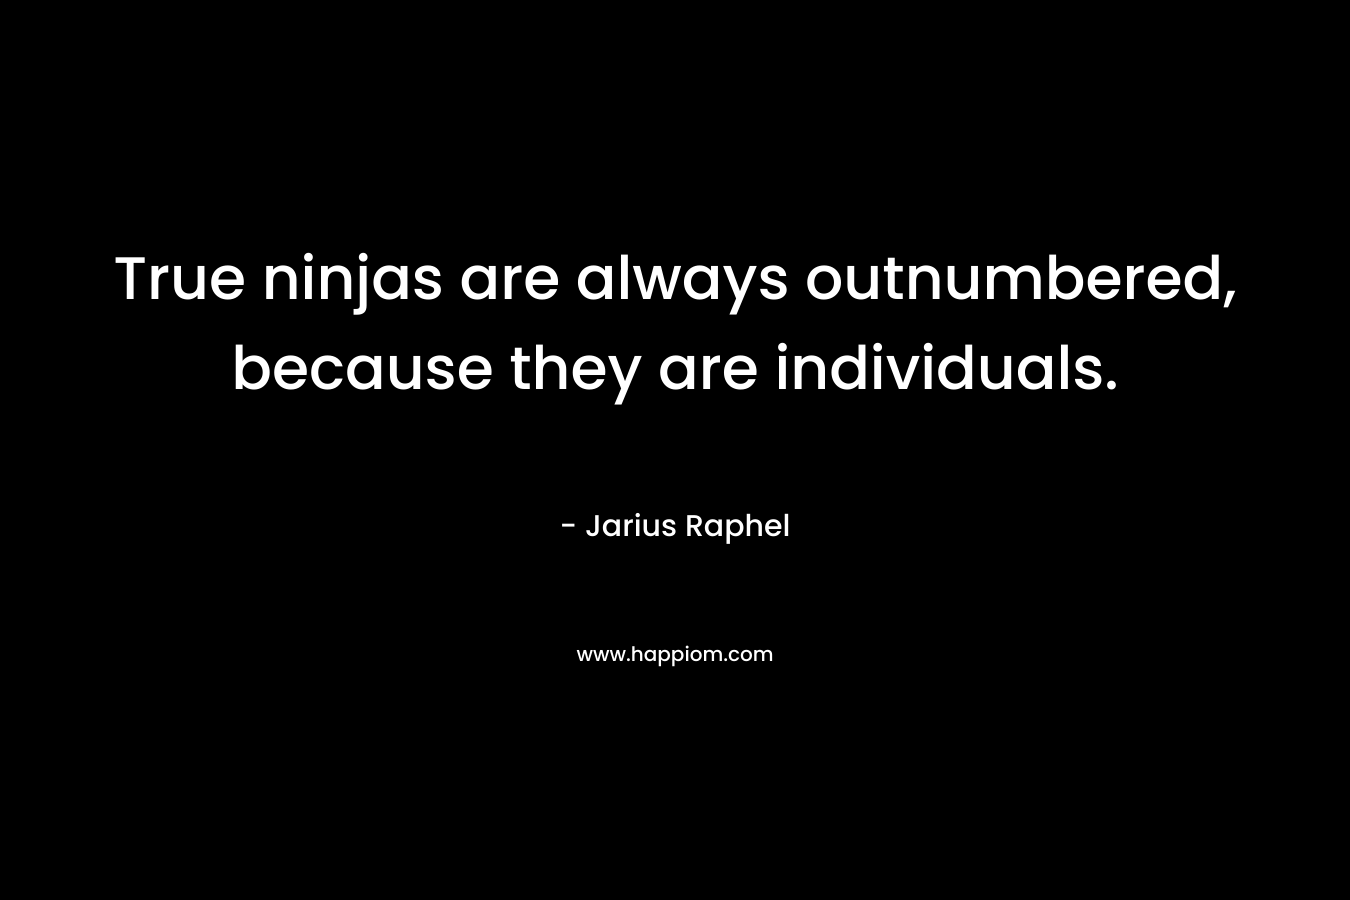 True ninjas are always outnumbered, because they are individuals. – Jarius Raphel